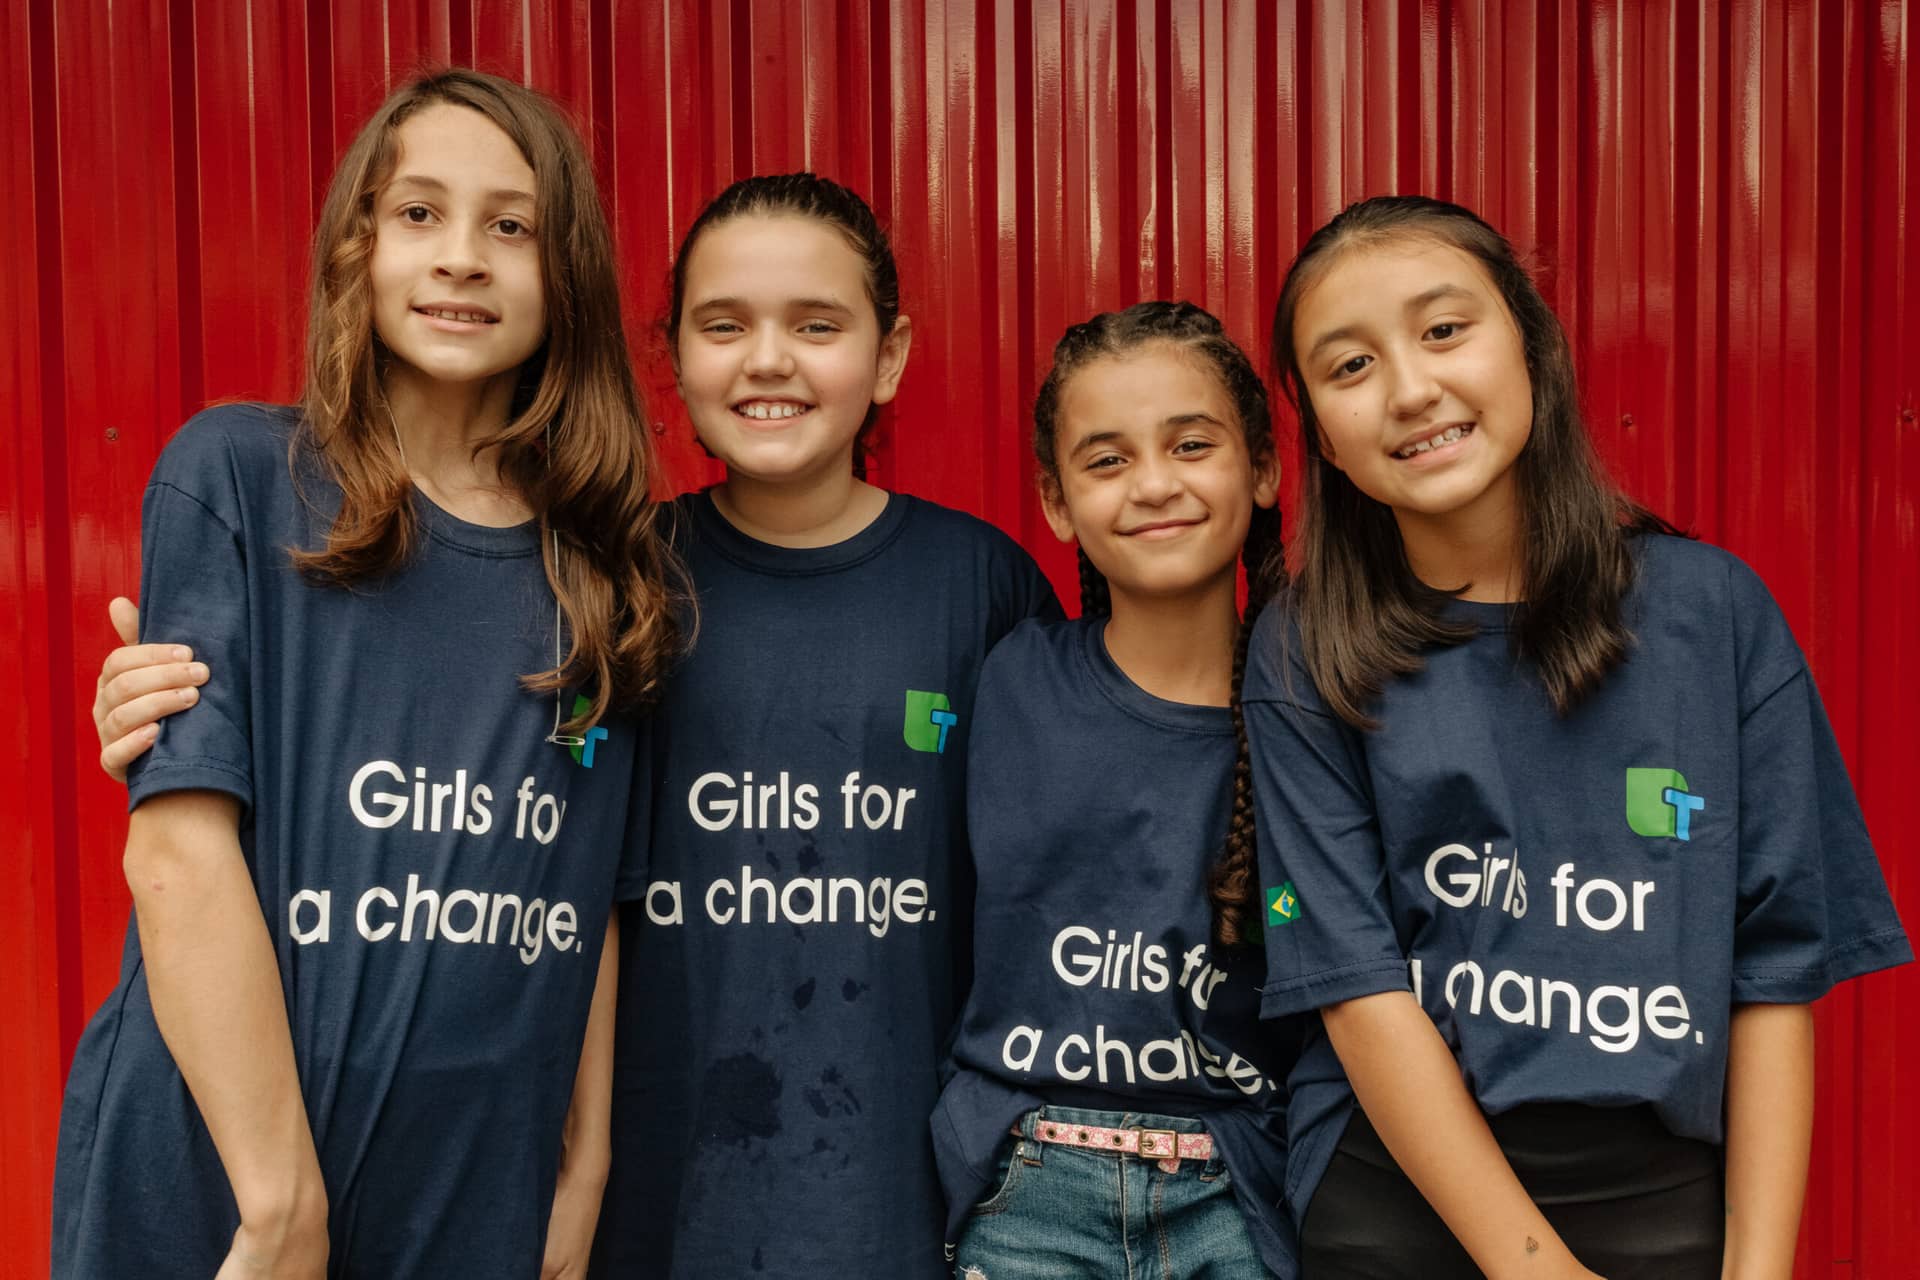 4 girls with girls for a change t-shirts on